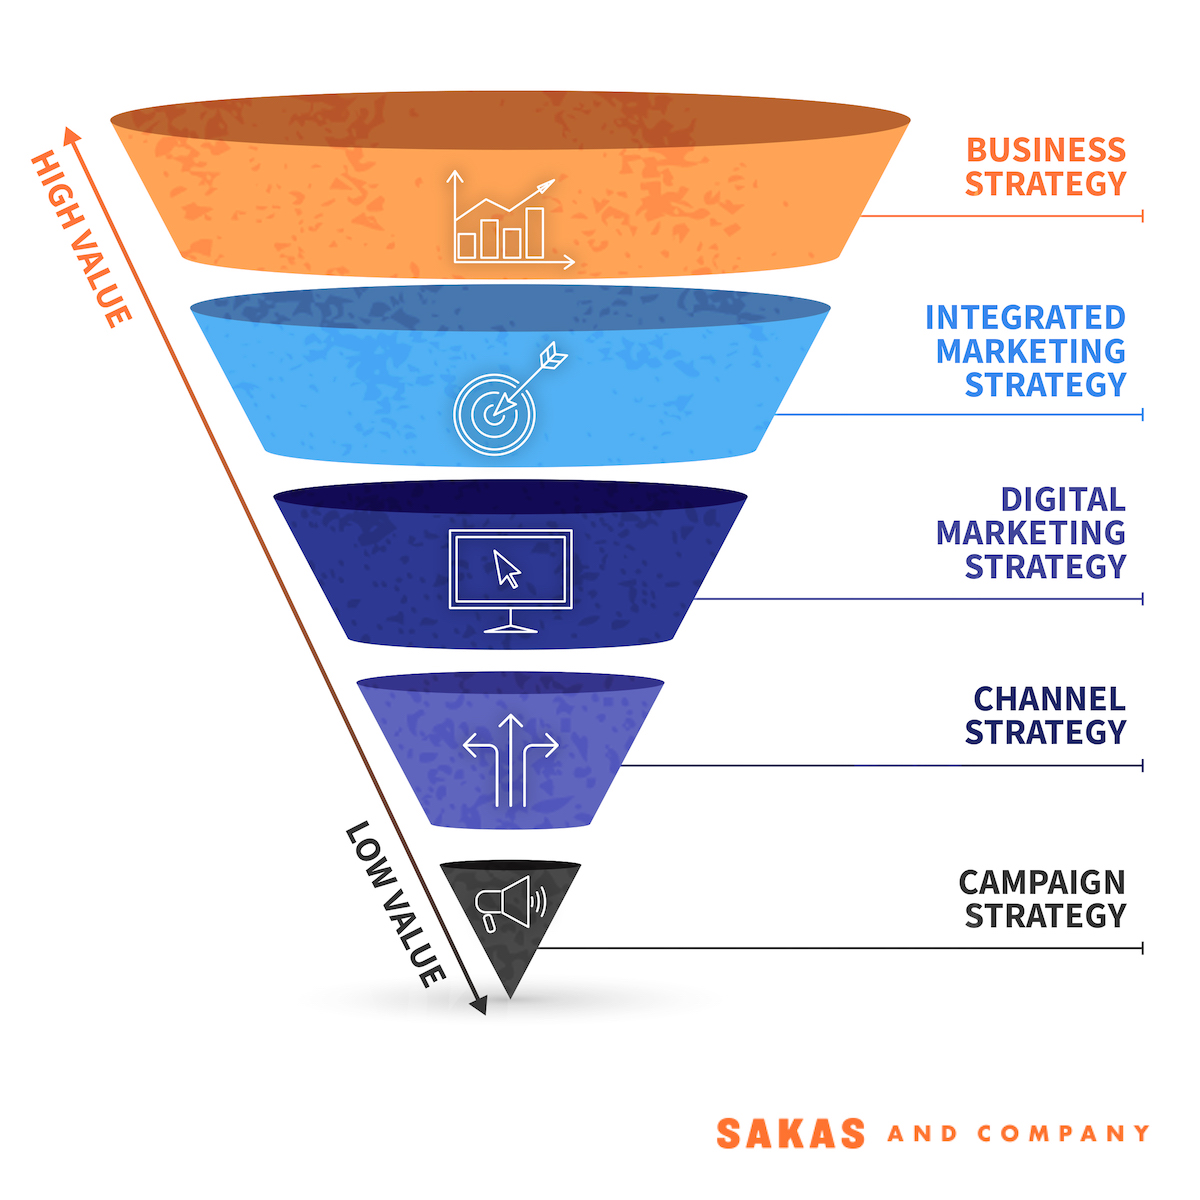 How close are your agencys services to the Business Strategy tier?